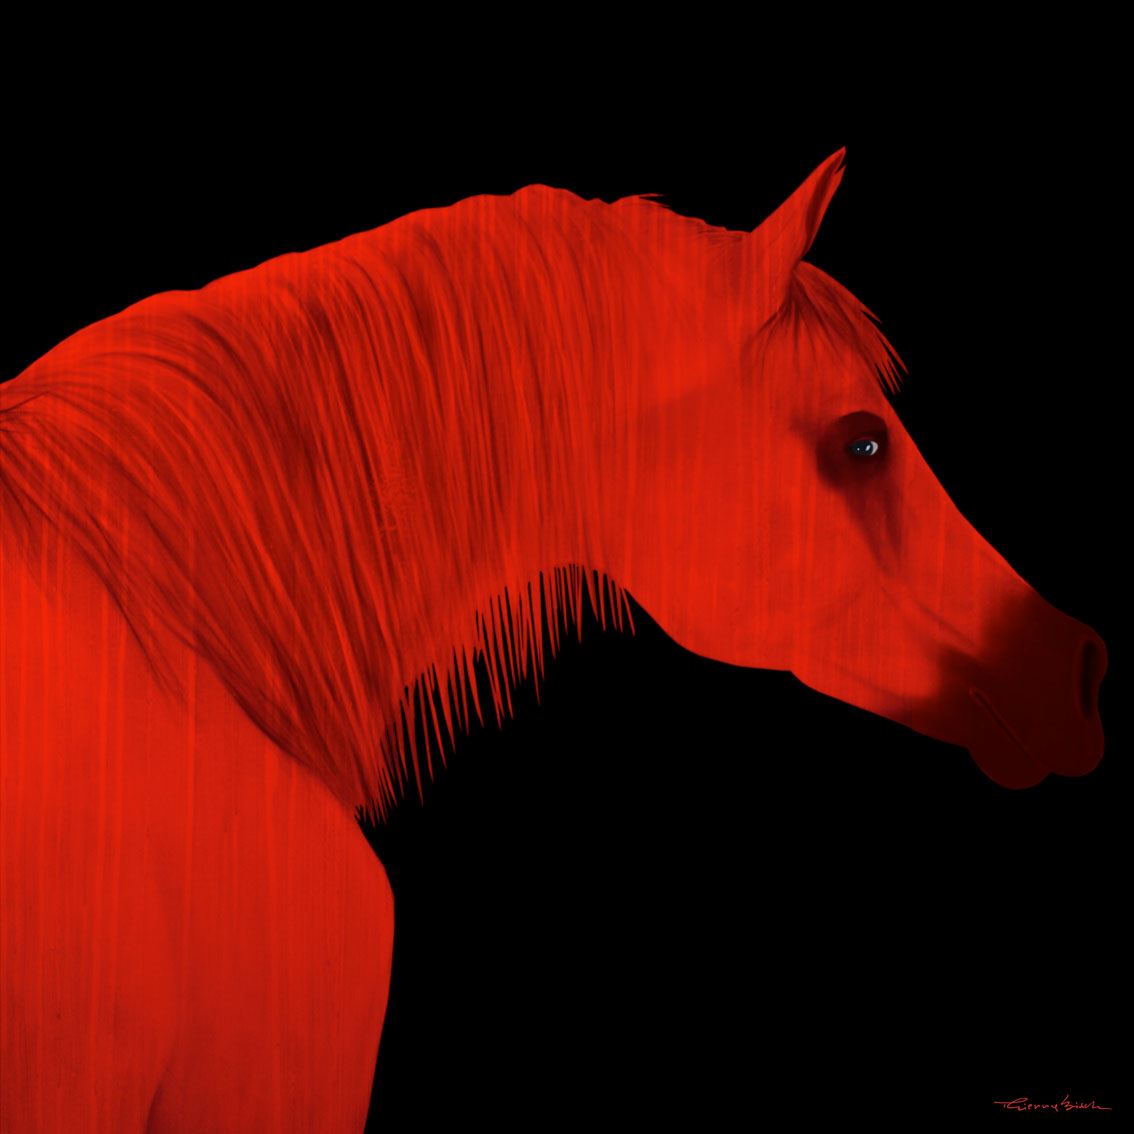 ARBOSIA Horse-red-stallion-arabian-yearling- Thierry Bisch Contemporary painter animals painting art decoration nature biodiversity conservation